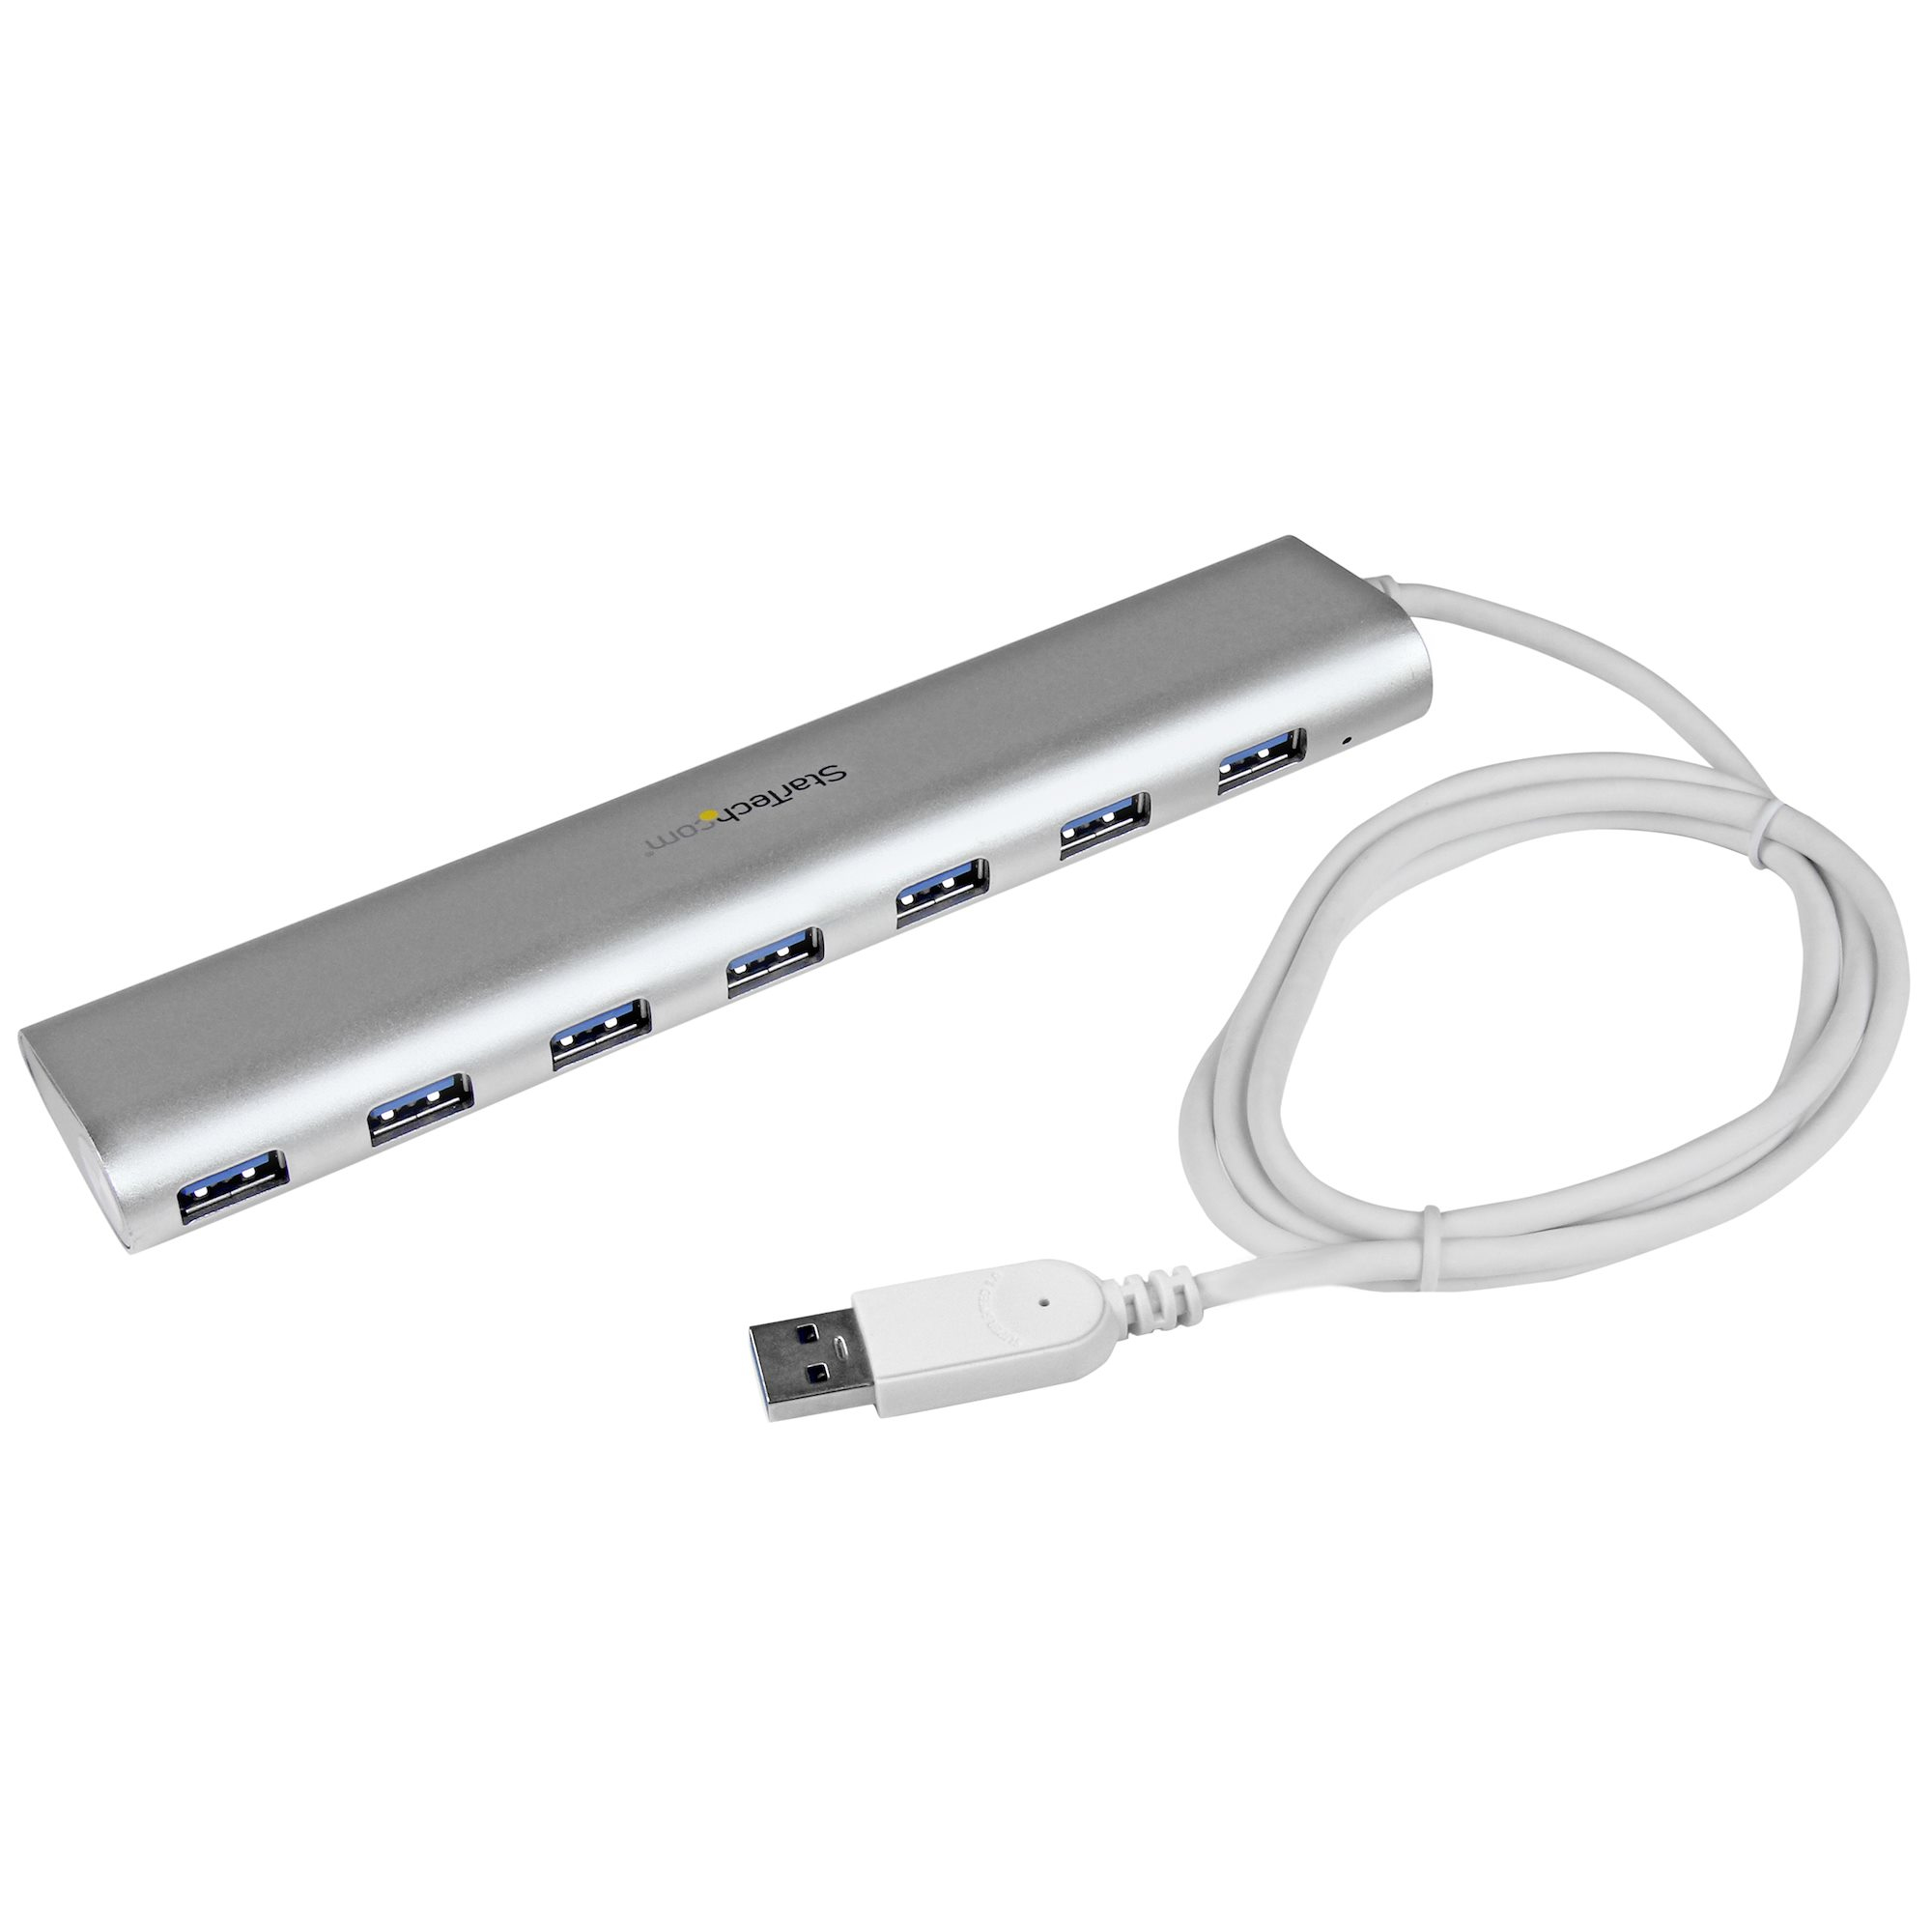 StarTech.com 7-Port USB Hub, USB A to 7x USB-A Ports, USB 5Gbps, Rugged Design, Bus or Self-Powered, Portable Laptop USB 3.0 Hub Expansion with Power Supply